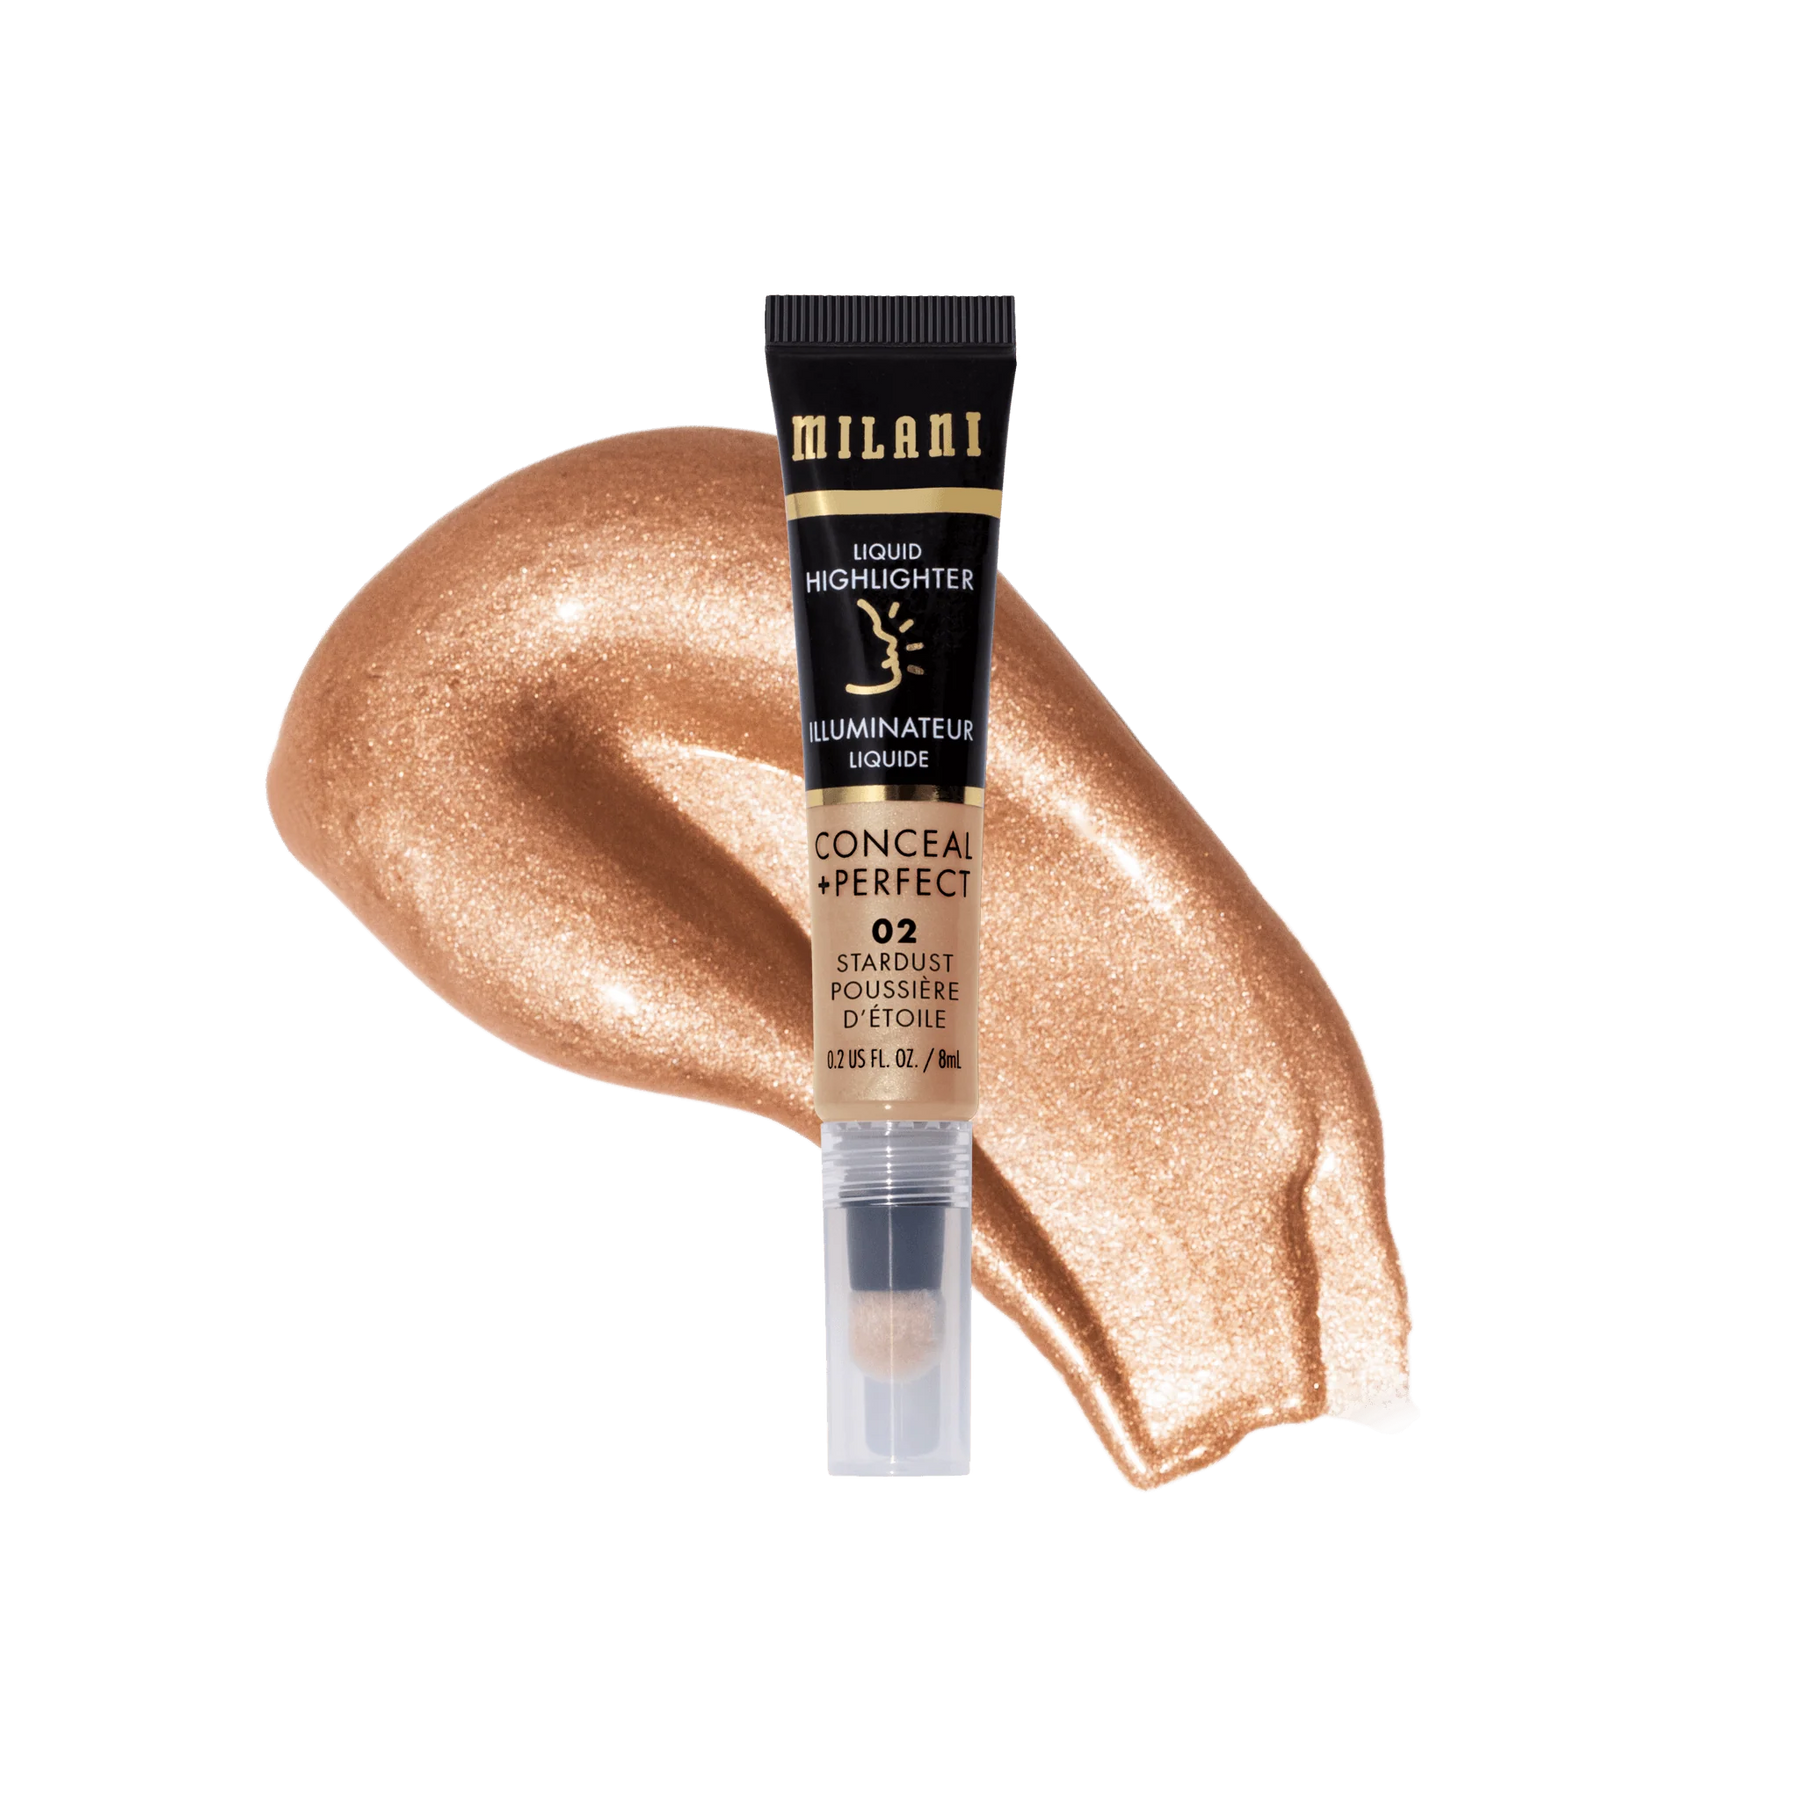 Milani CONCEAL + PERFECT LIQUID HIGHLIGHTER